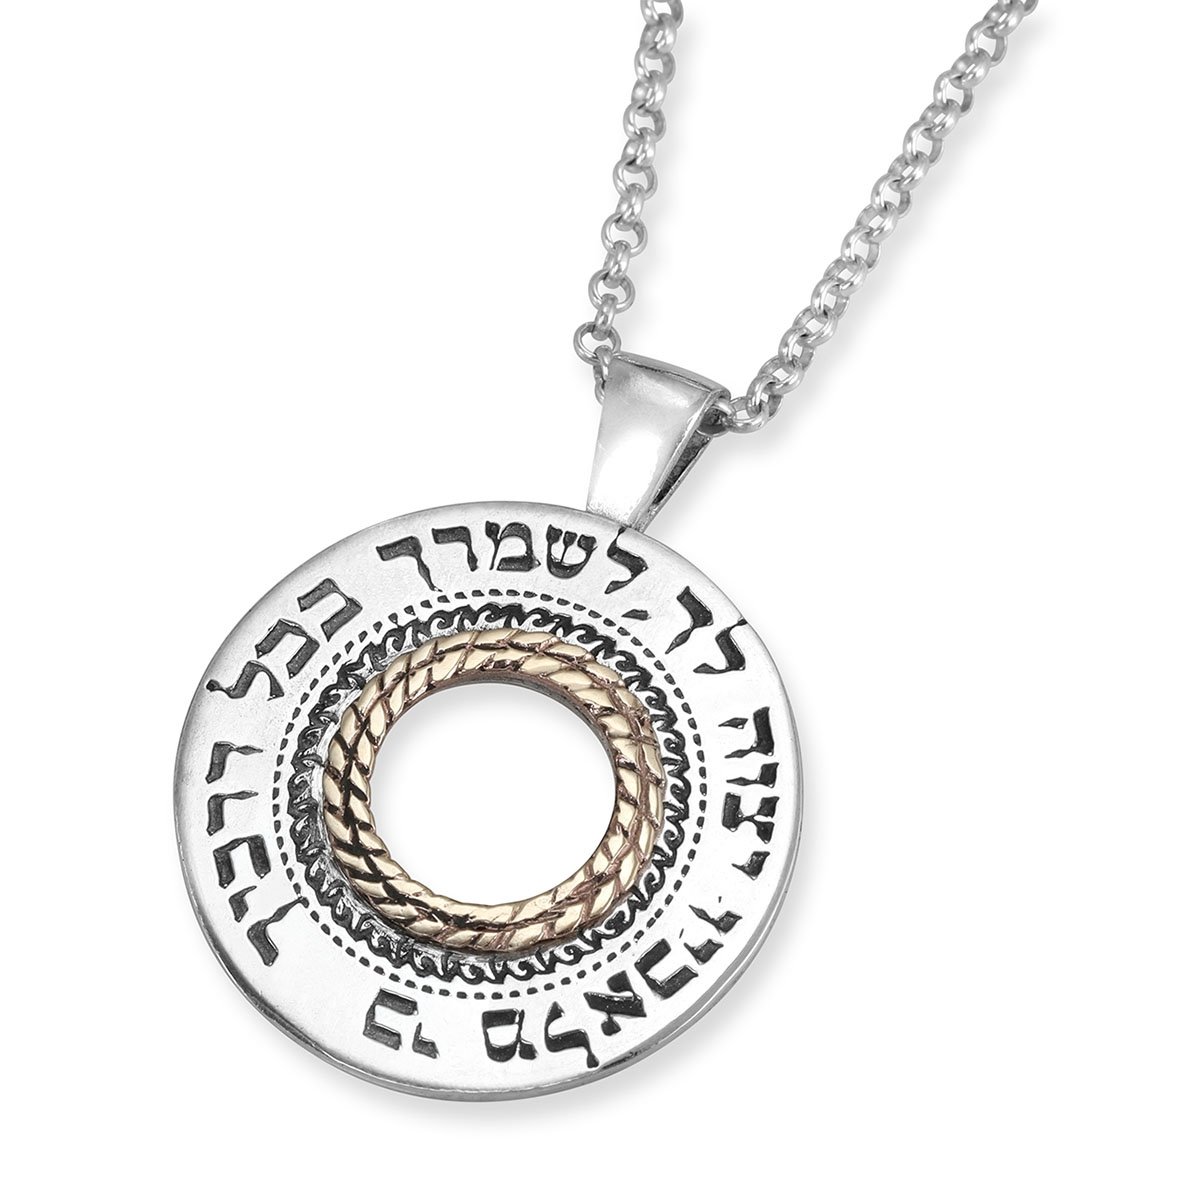 Silver and Gold Spinning Wheel Necklace - Traveler's Prayer (Psalms 91:11) - 1